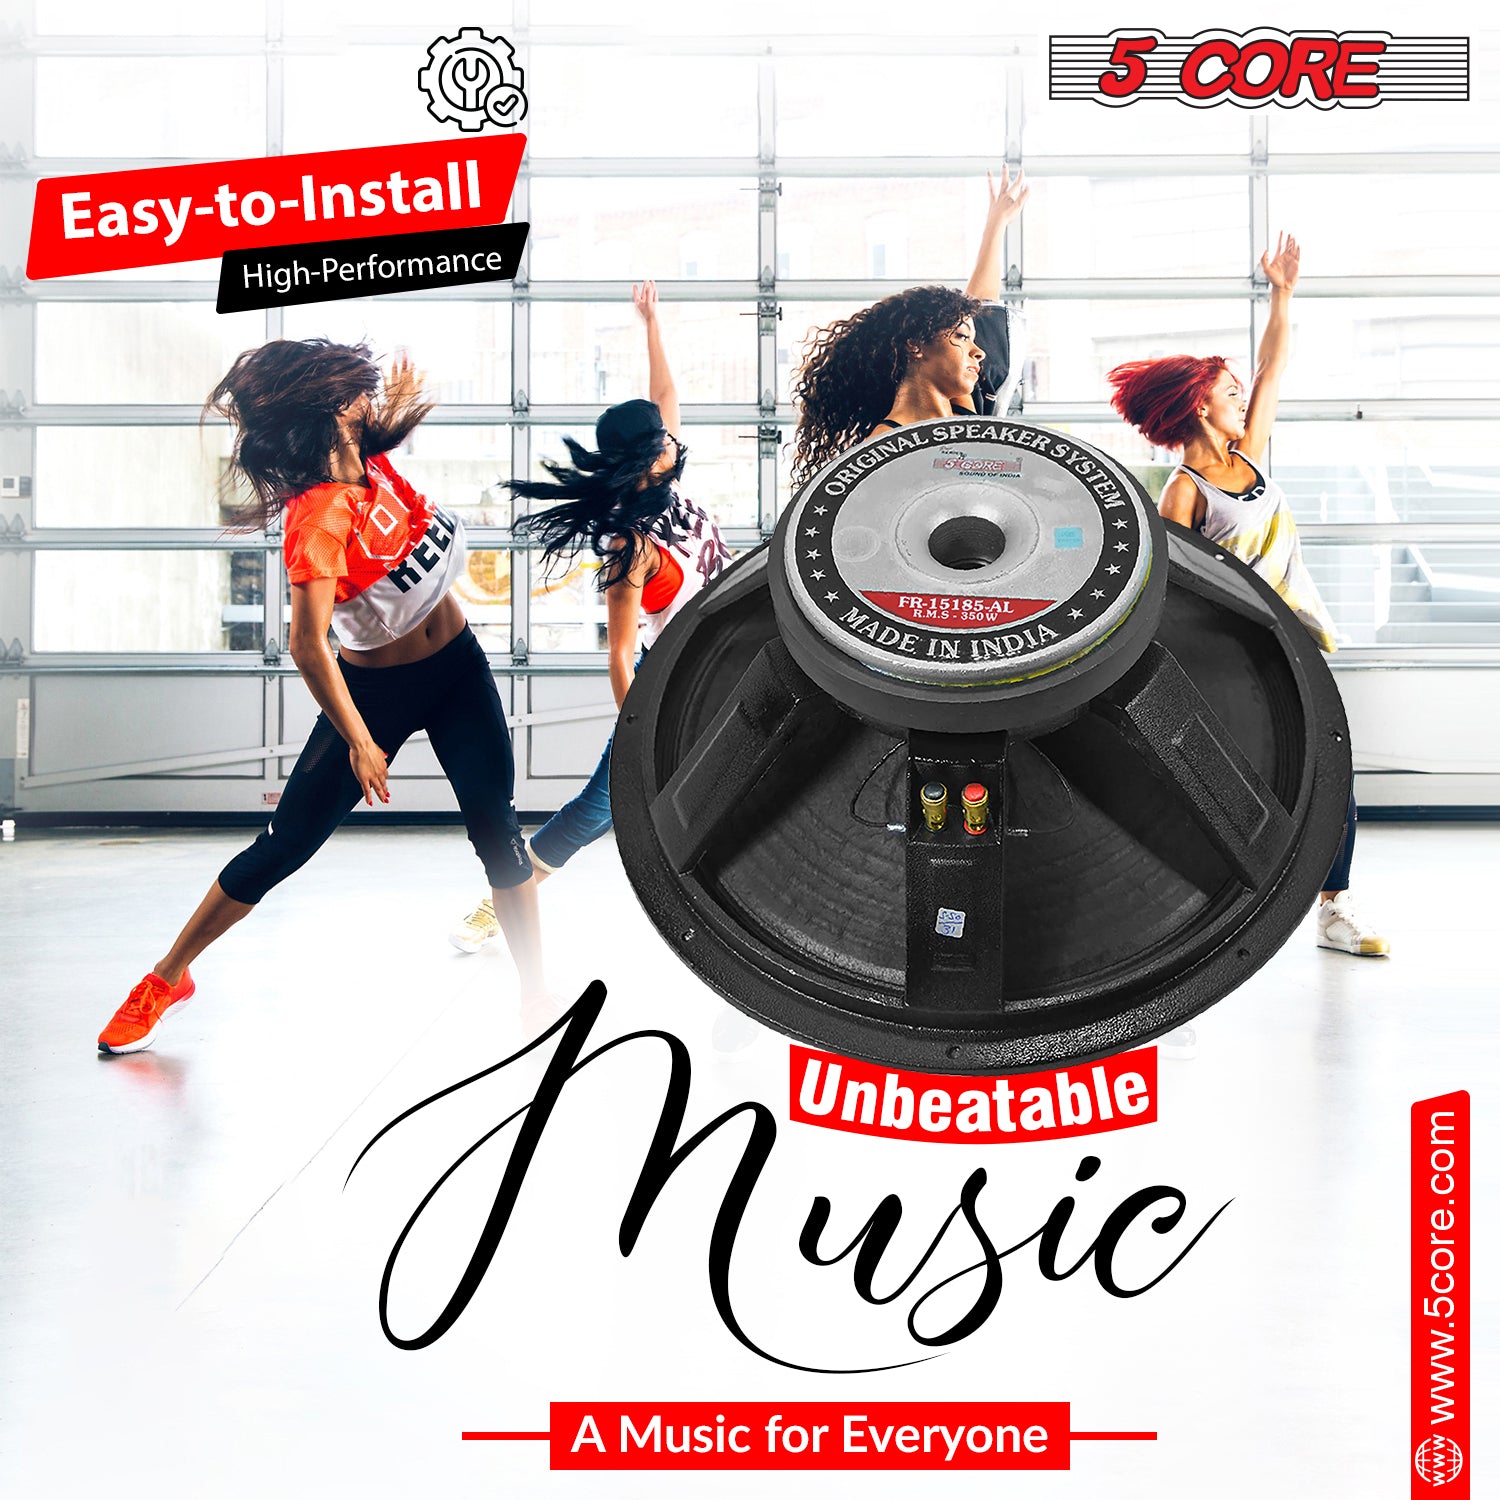 5 core 15 inch speaker gives unbeatable music